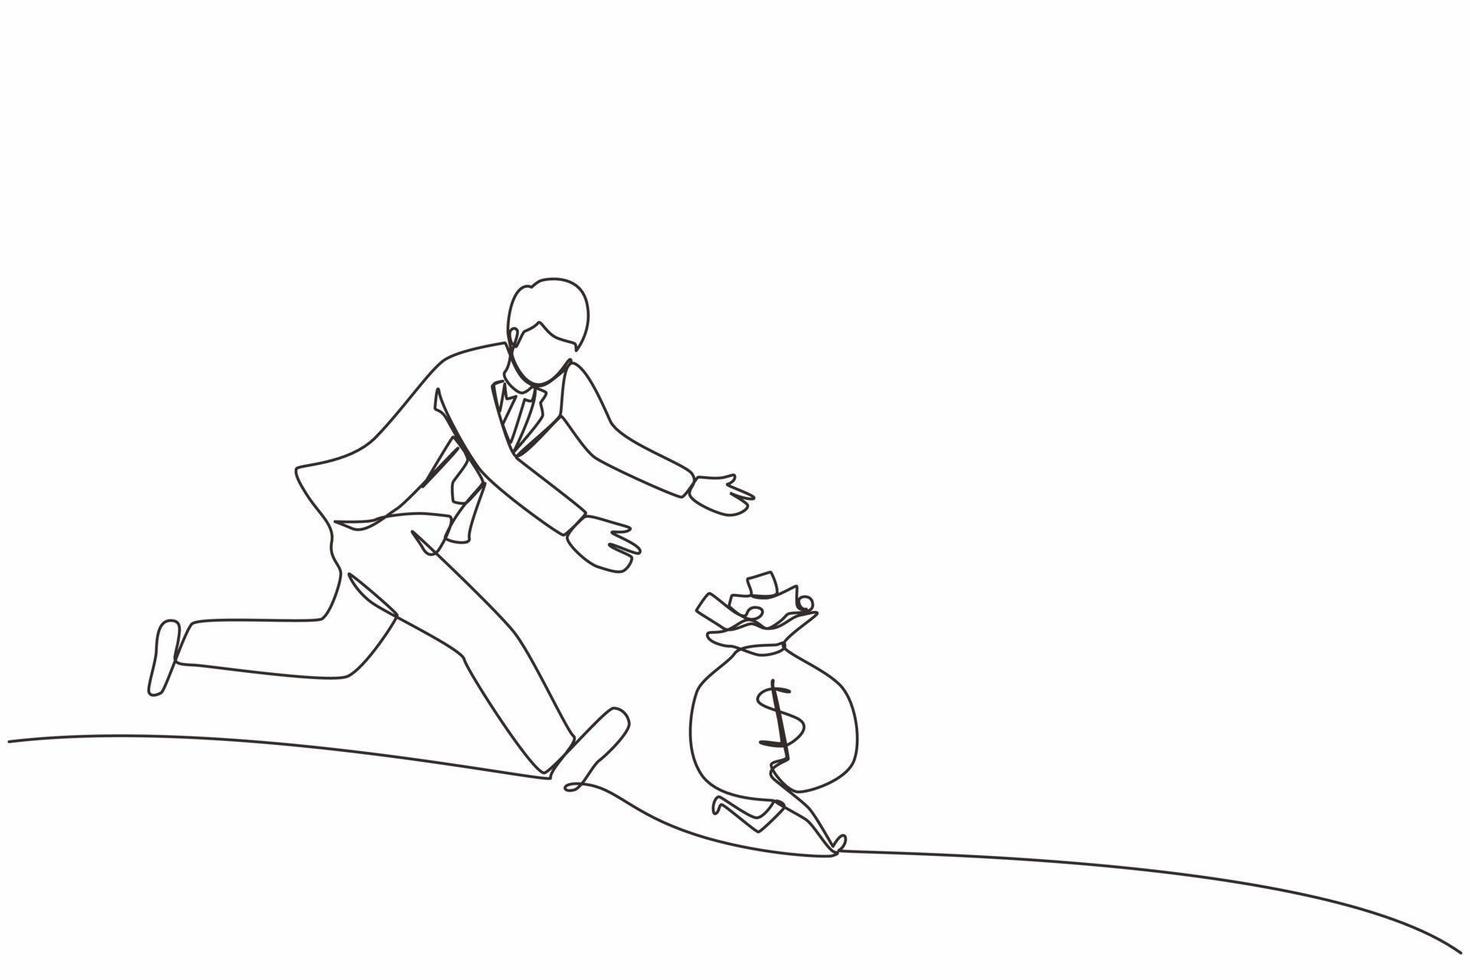 Single continuous line drawing businessman chasing money bag dollar run away. Concept of achieving goals and profits, striving for success, running for money. One line draw design vector illustration